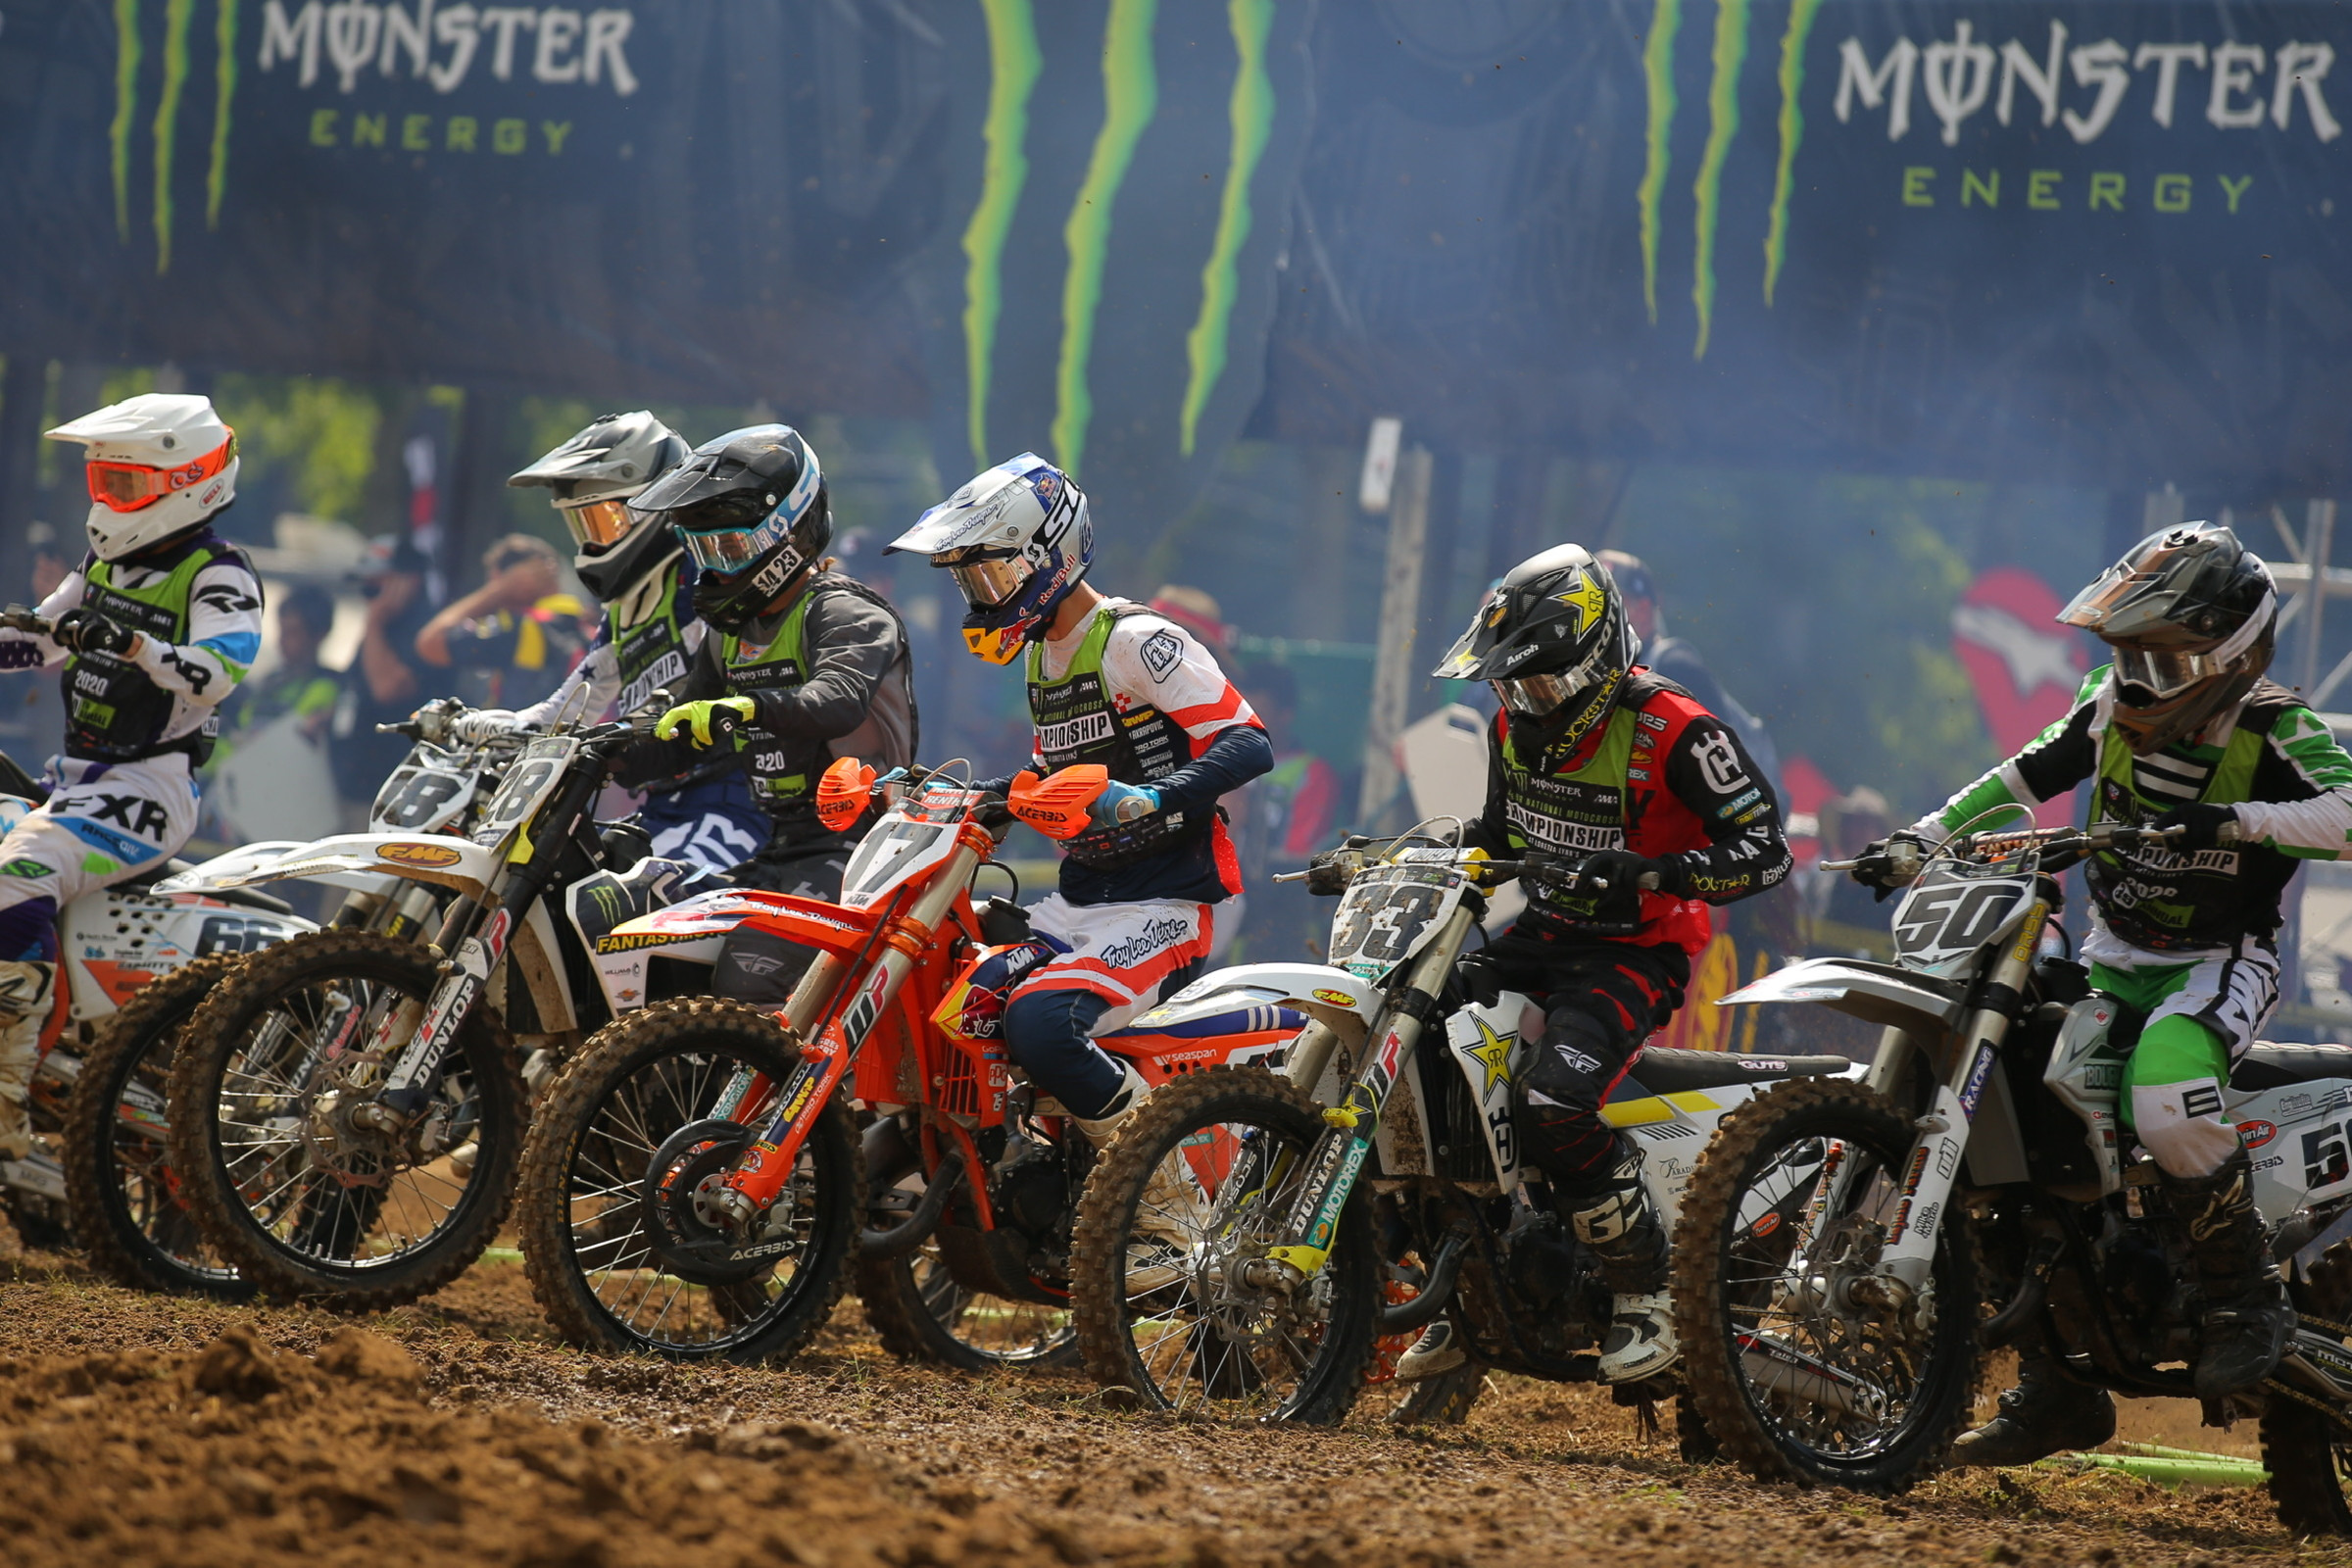 2020 MXGP of Latvia and AMA Amateur National Motocross Championship Live Stream Schedule image